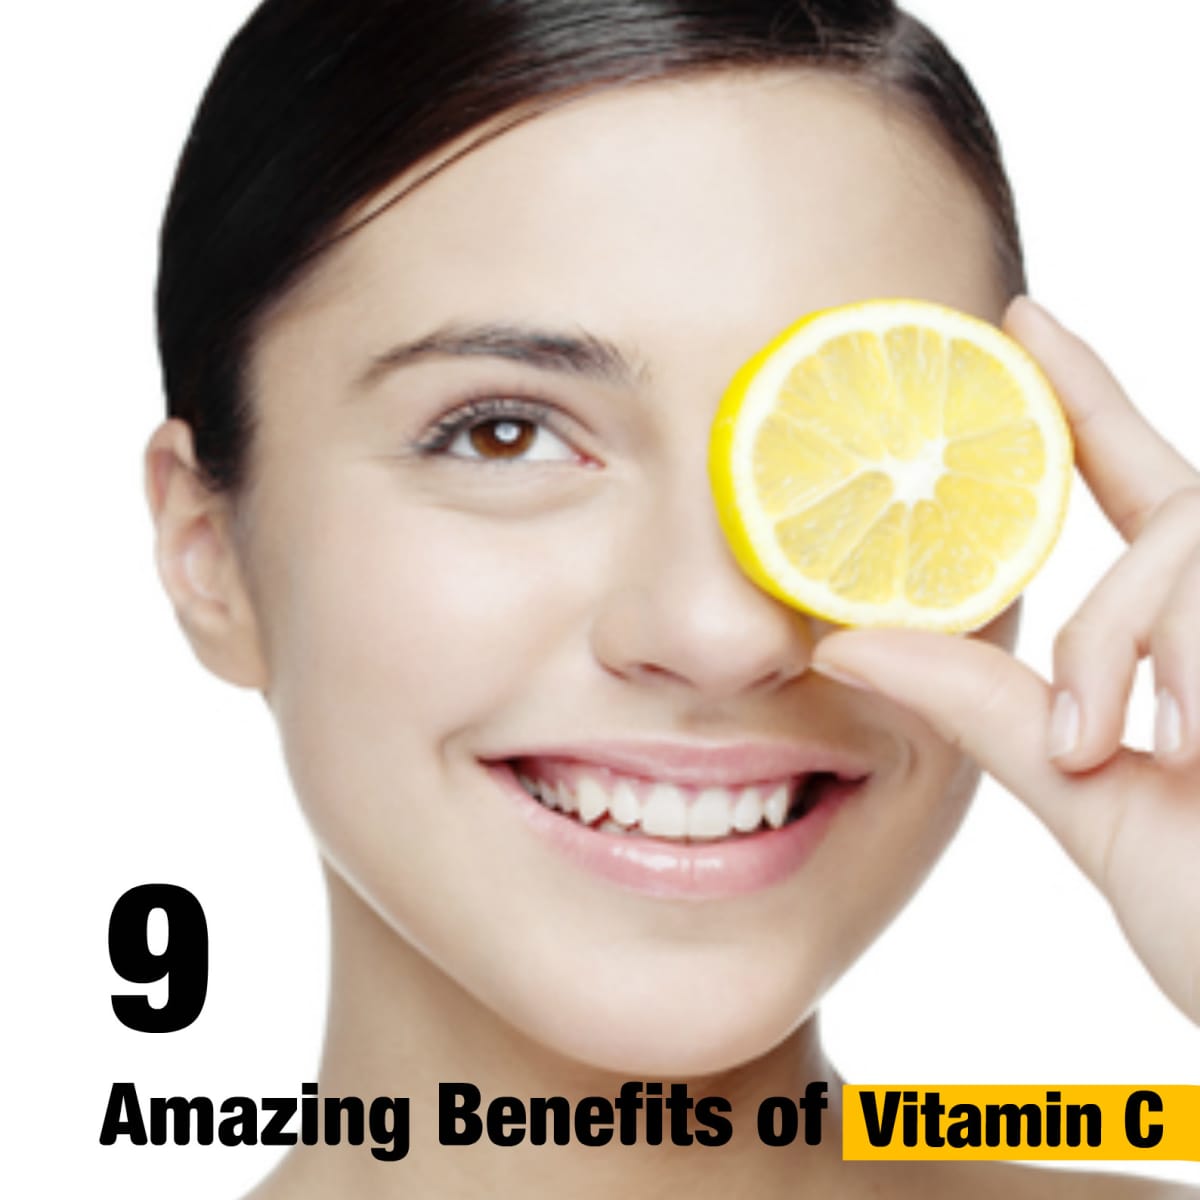 Vitamin C Serum Benefits For The Face